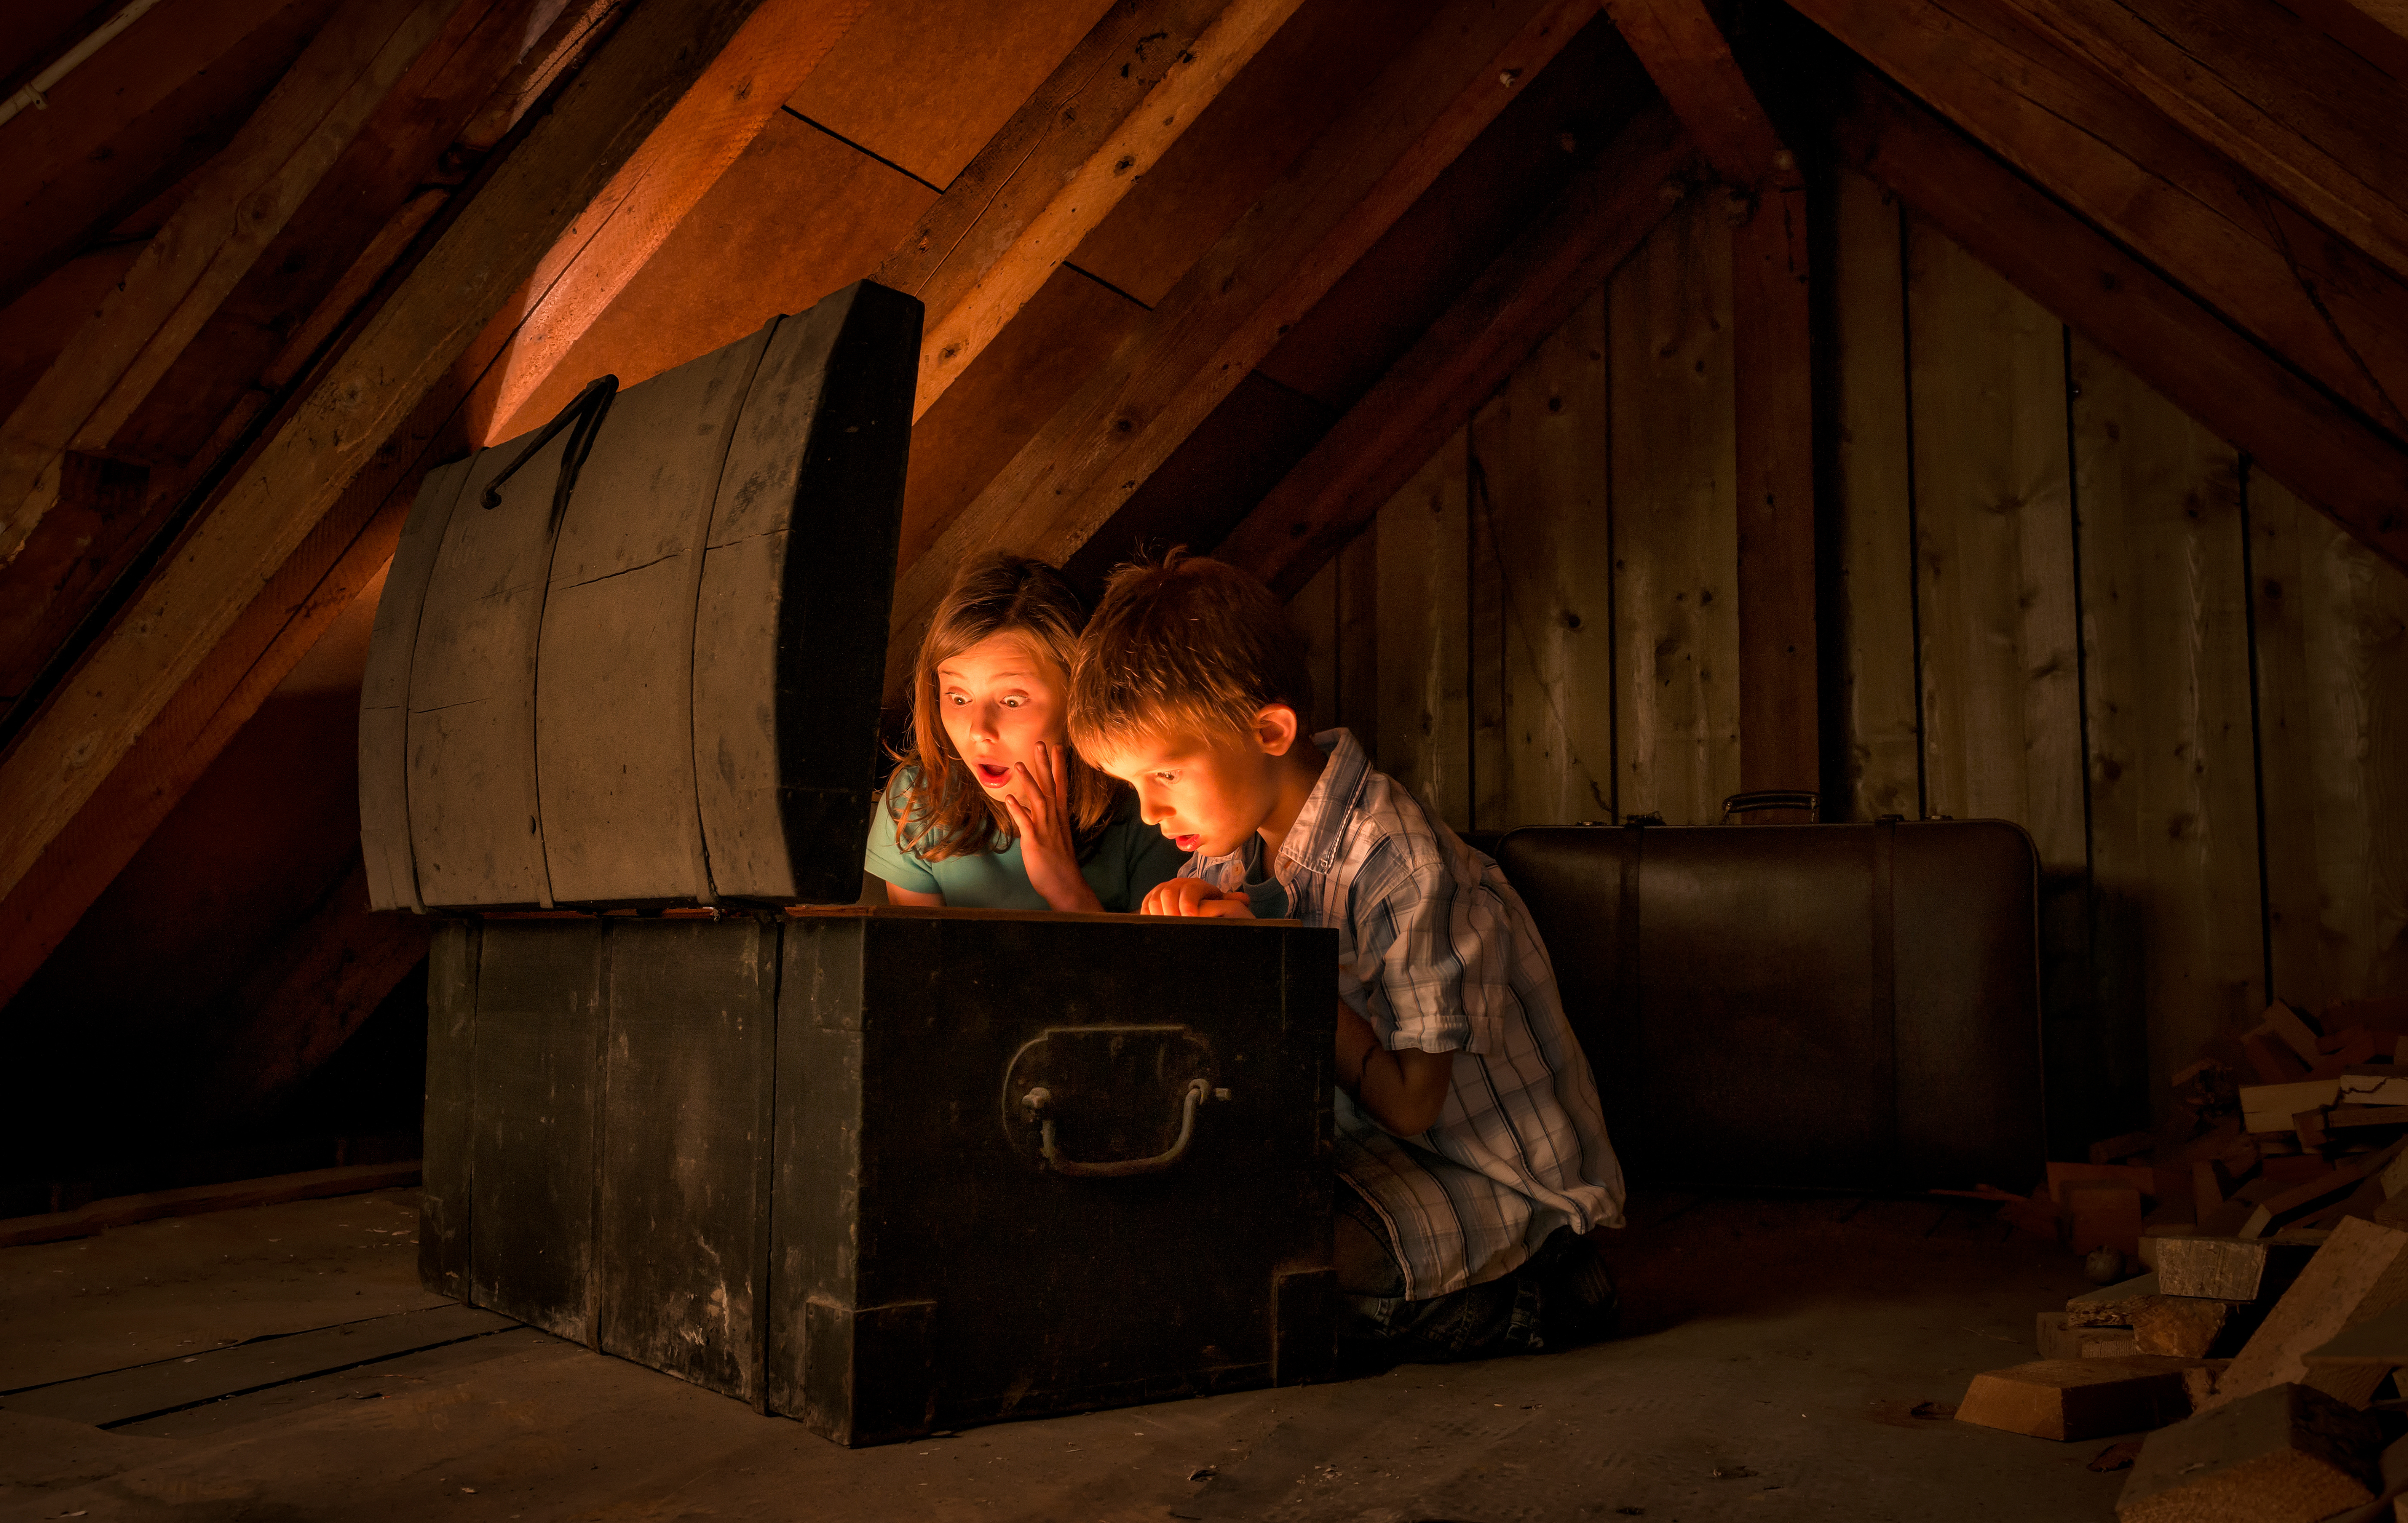 Kids finding hidden treasures of collectibles at home attic